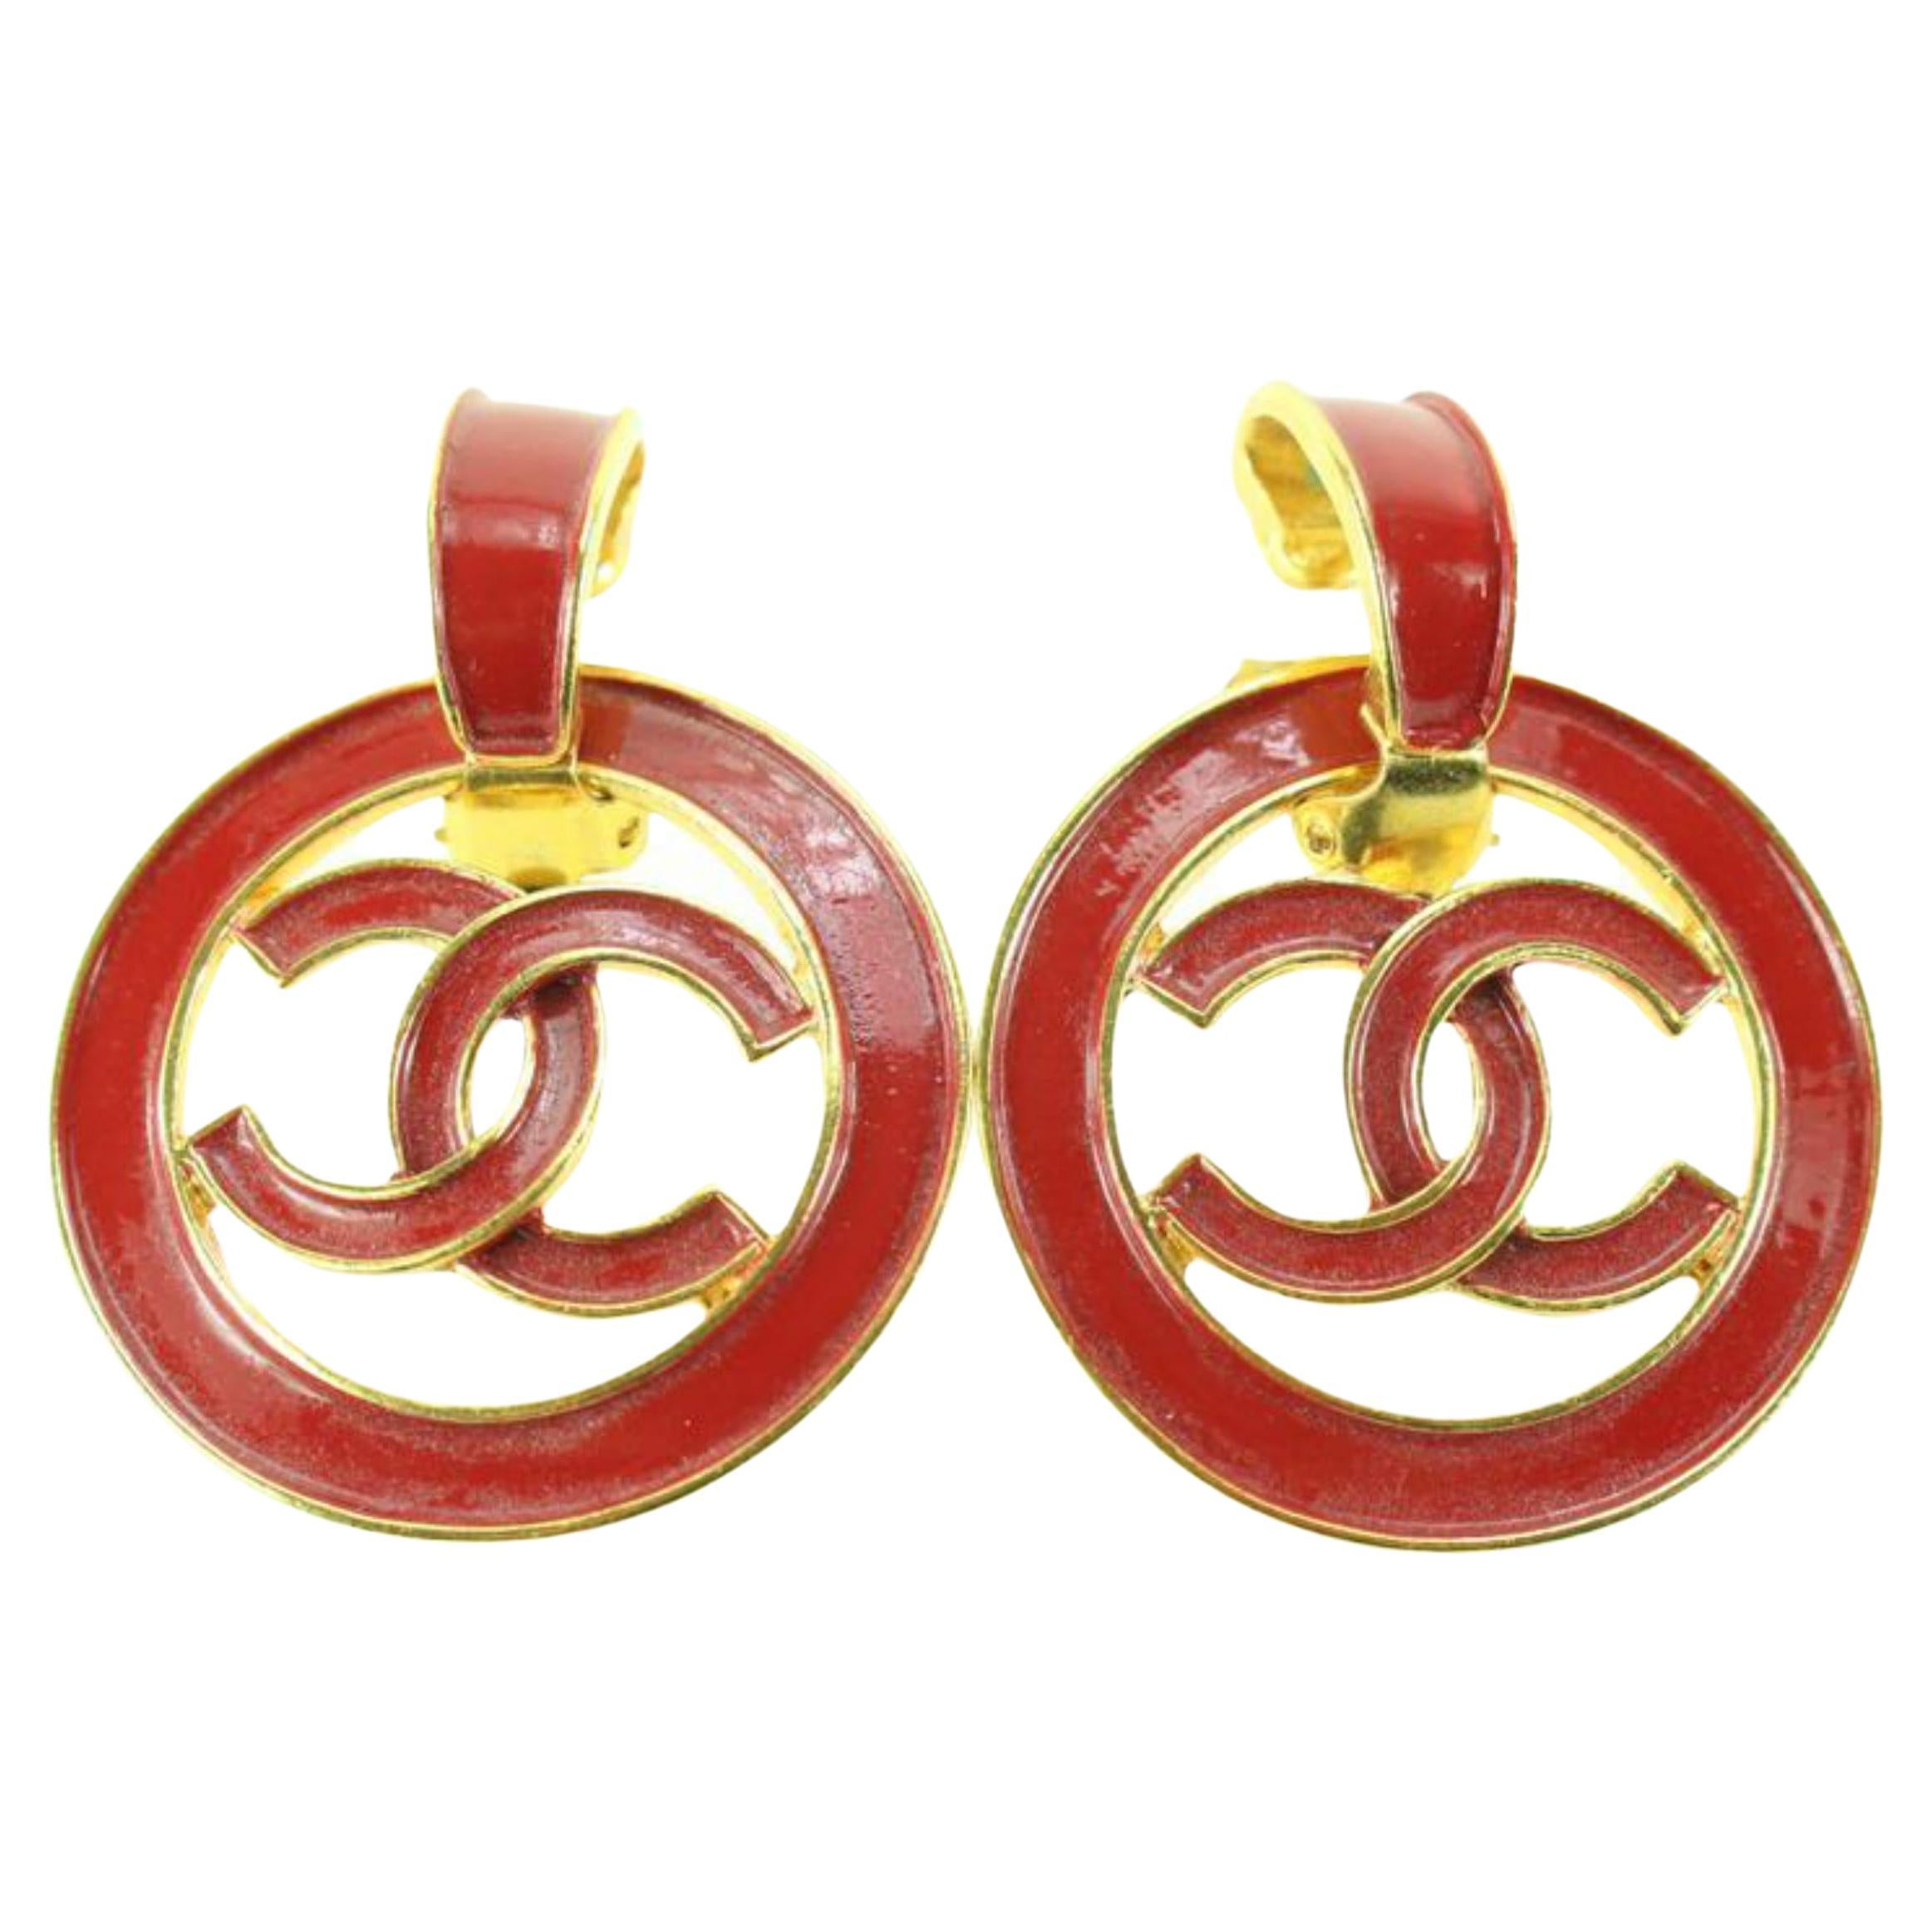 CHANEL Chanel Earrings 25 Coco Mark Gold Matelasse Accessories